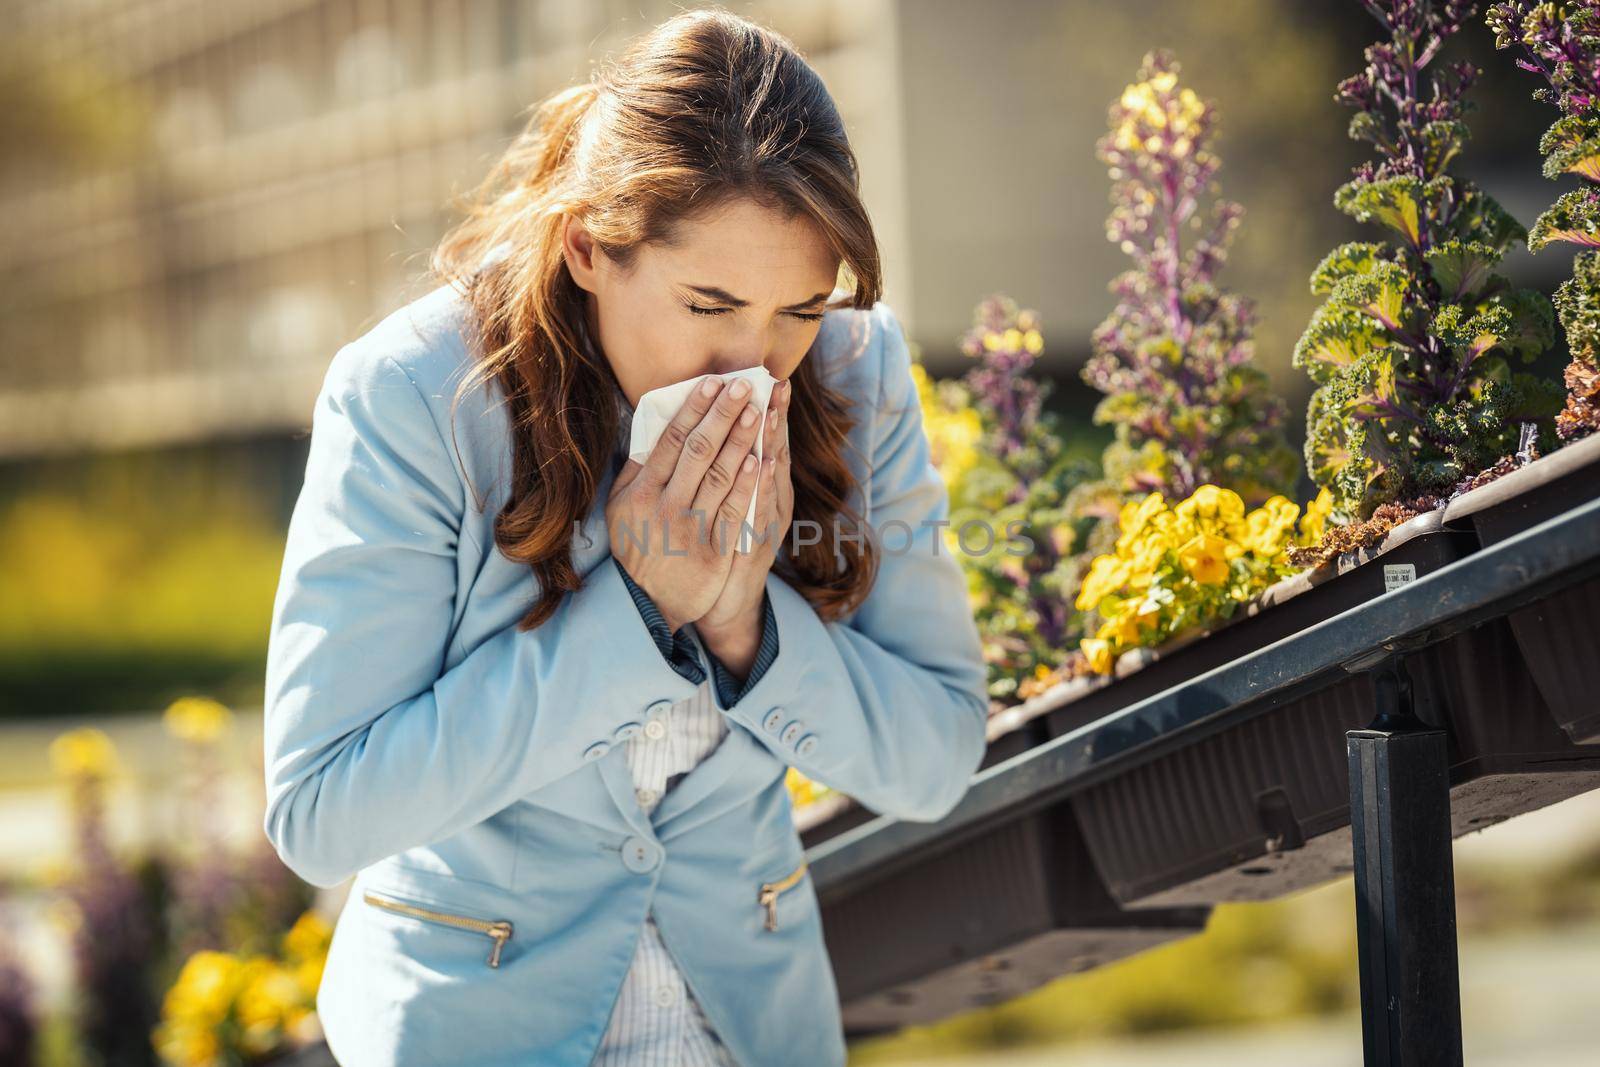 A young business woman blowing her nose out during a break outside due to allergies or colds.